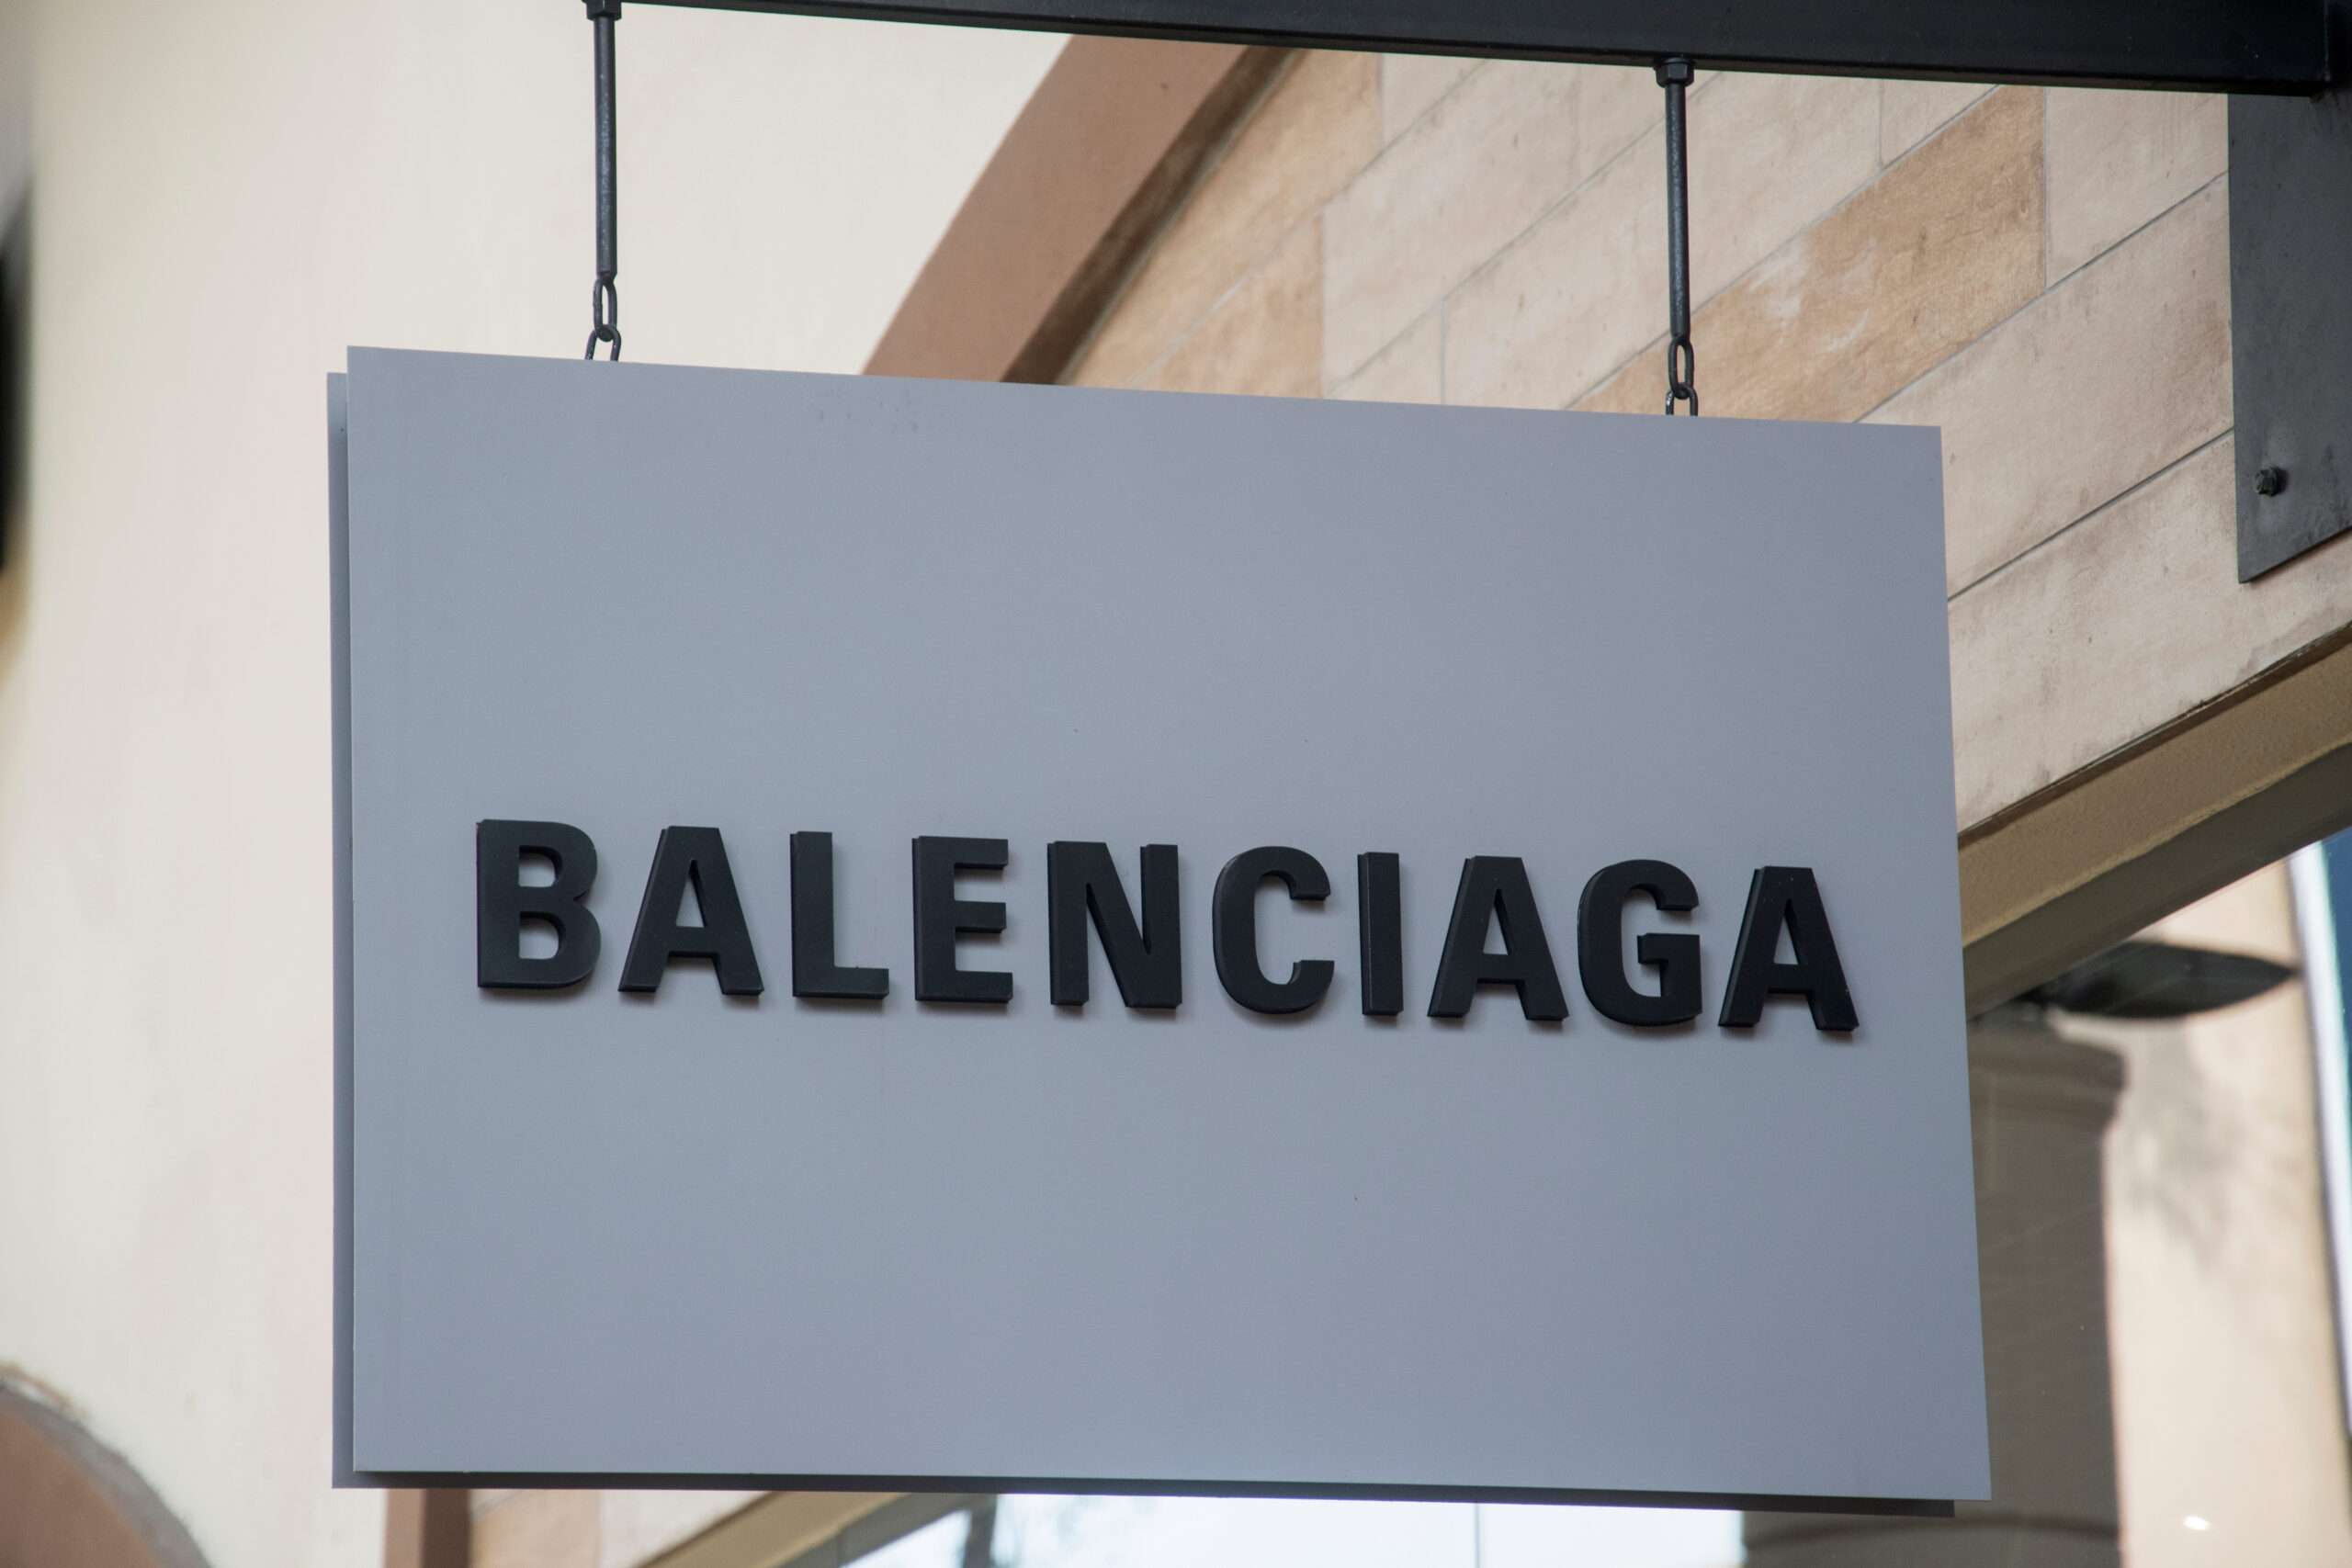 Balenciaga Under Fire for BDSM-Themed Objects Campaign Involving Toddlers